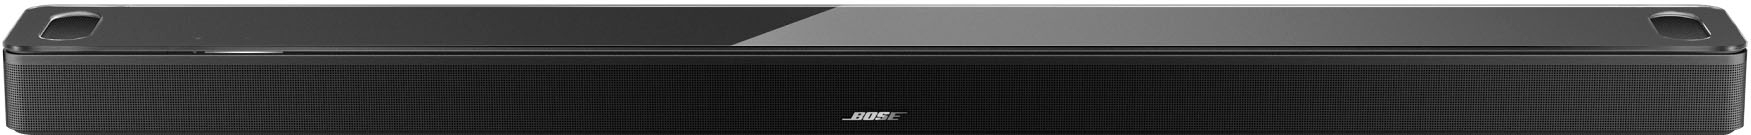 882963-1100 Soundbar Best Ultra and Assistant Dolby Buy Black - Atmos Bose Smart with Voice